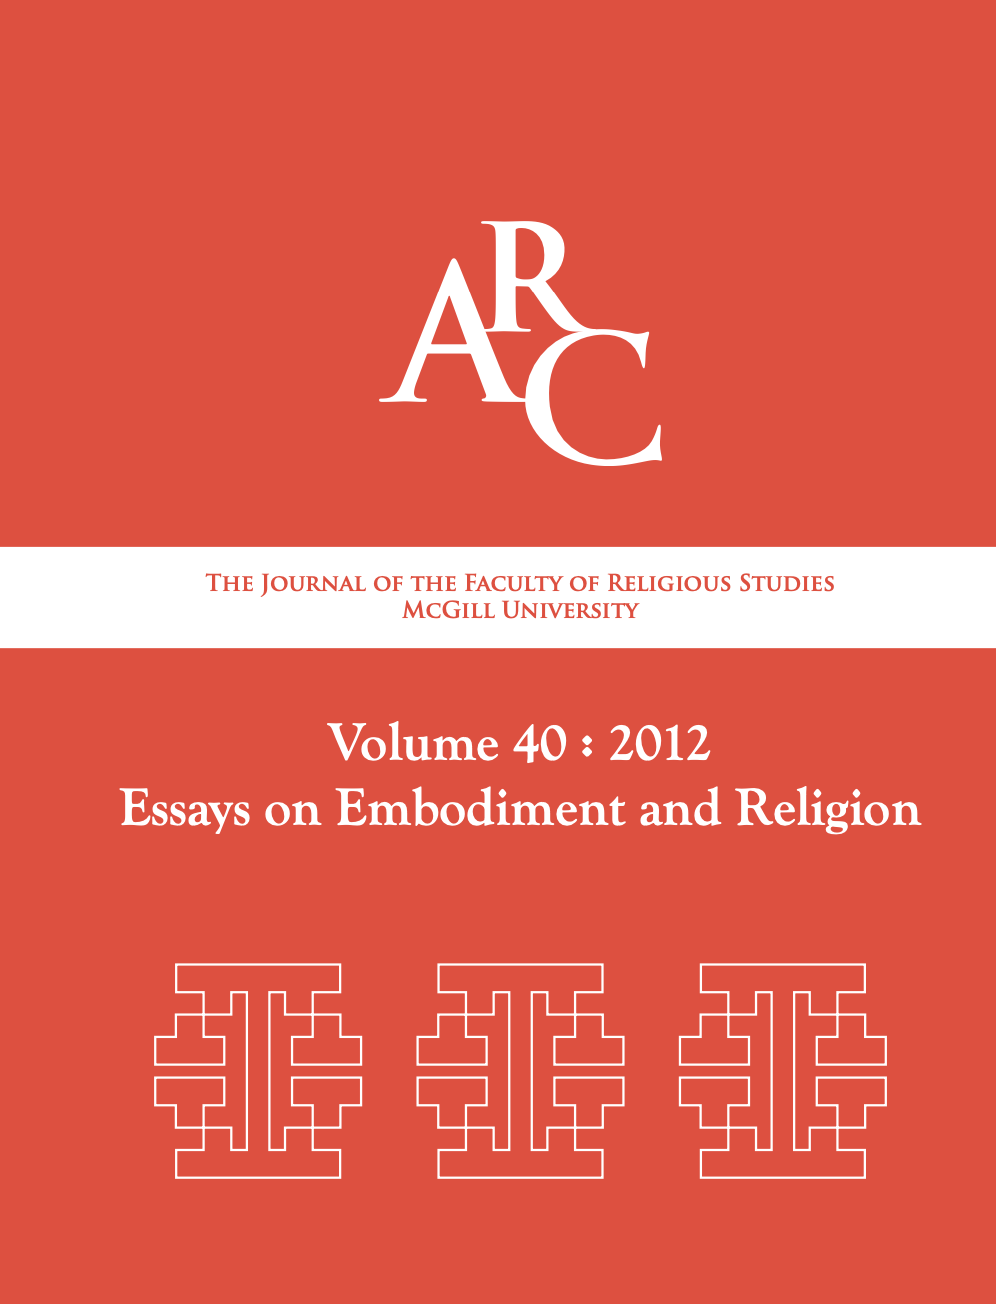 					View Vol. 40 (2012): Arc: Essays on Embodiment and Religion
				